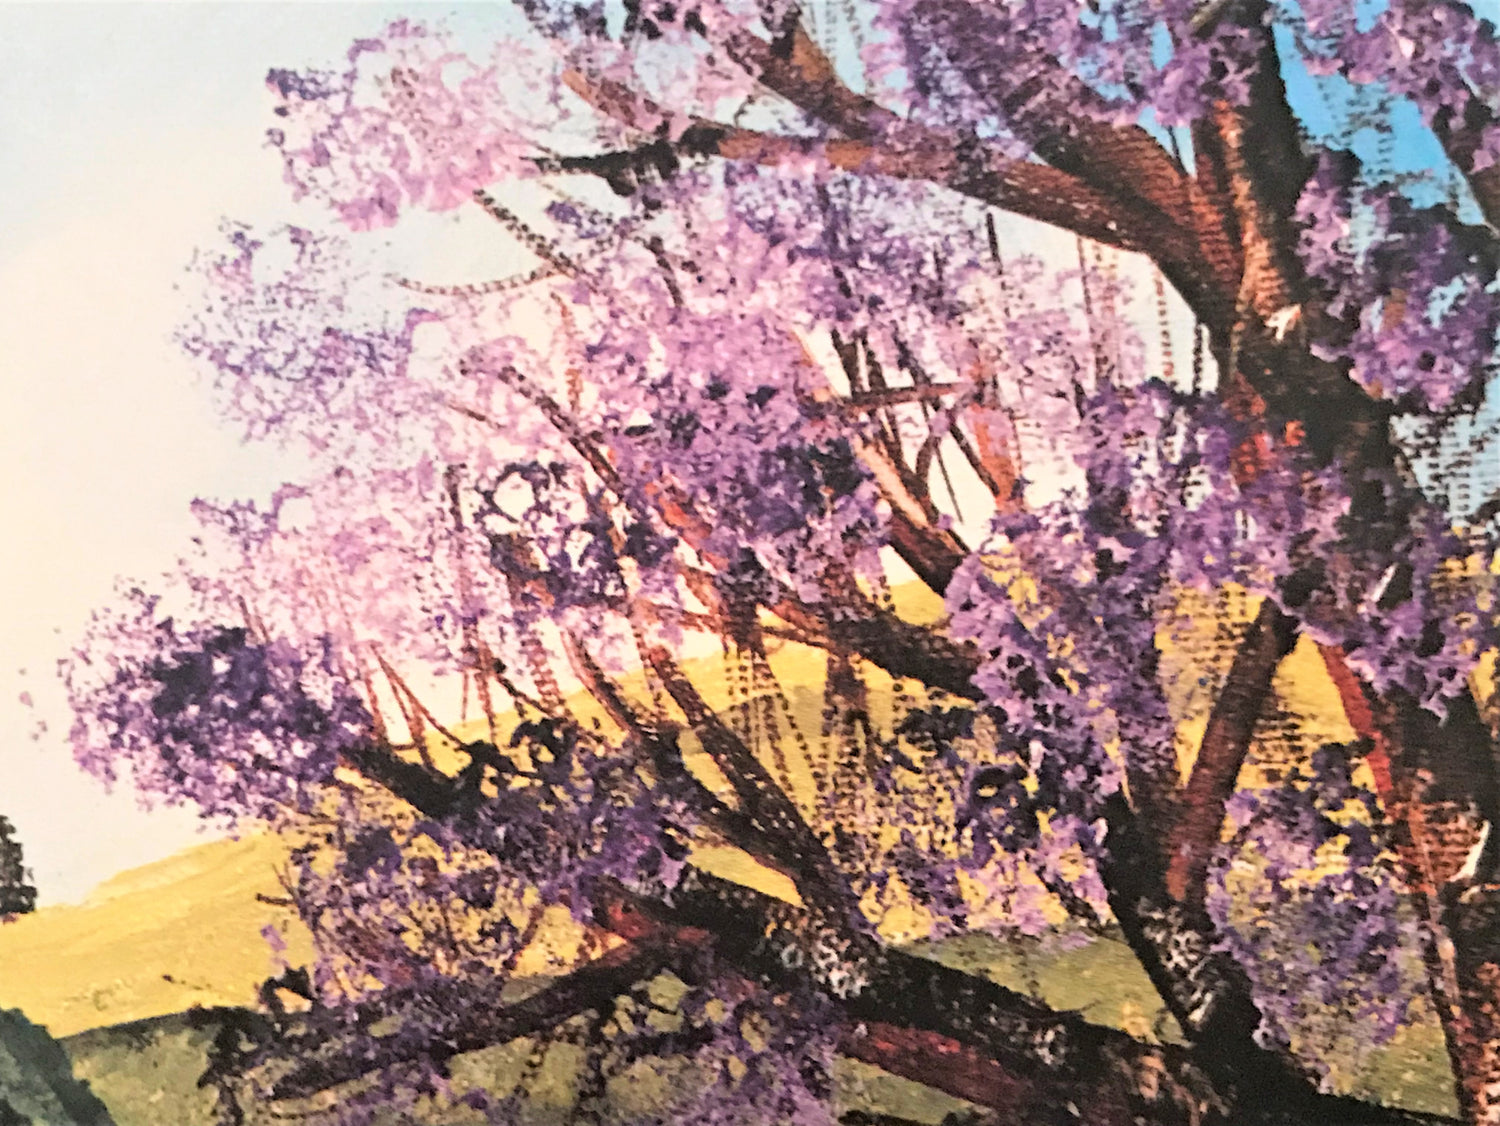 Swing Into Spring Jane Wooster Scott Offset Lithograph Print Artist Hand Signed and Numbered